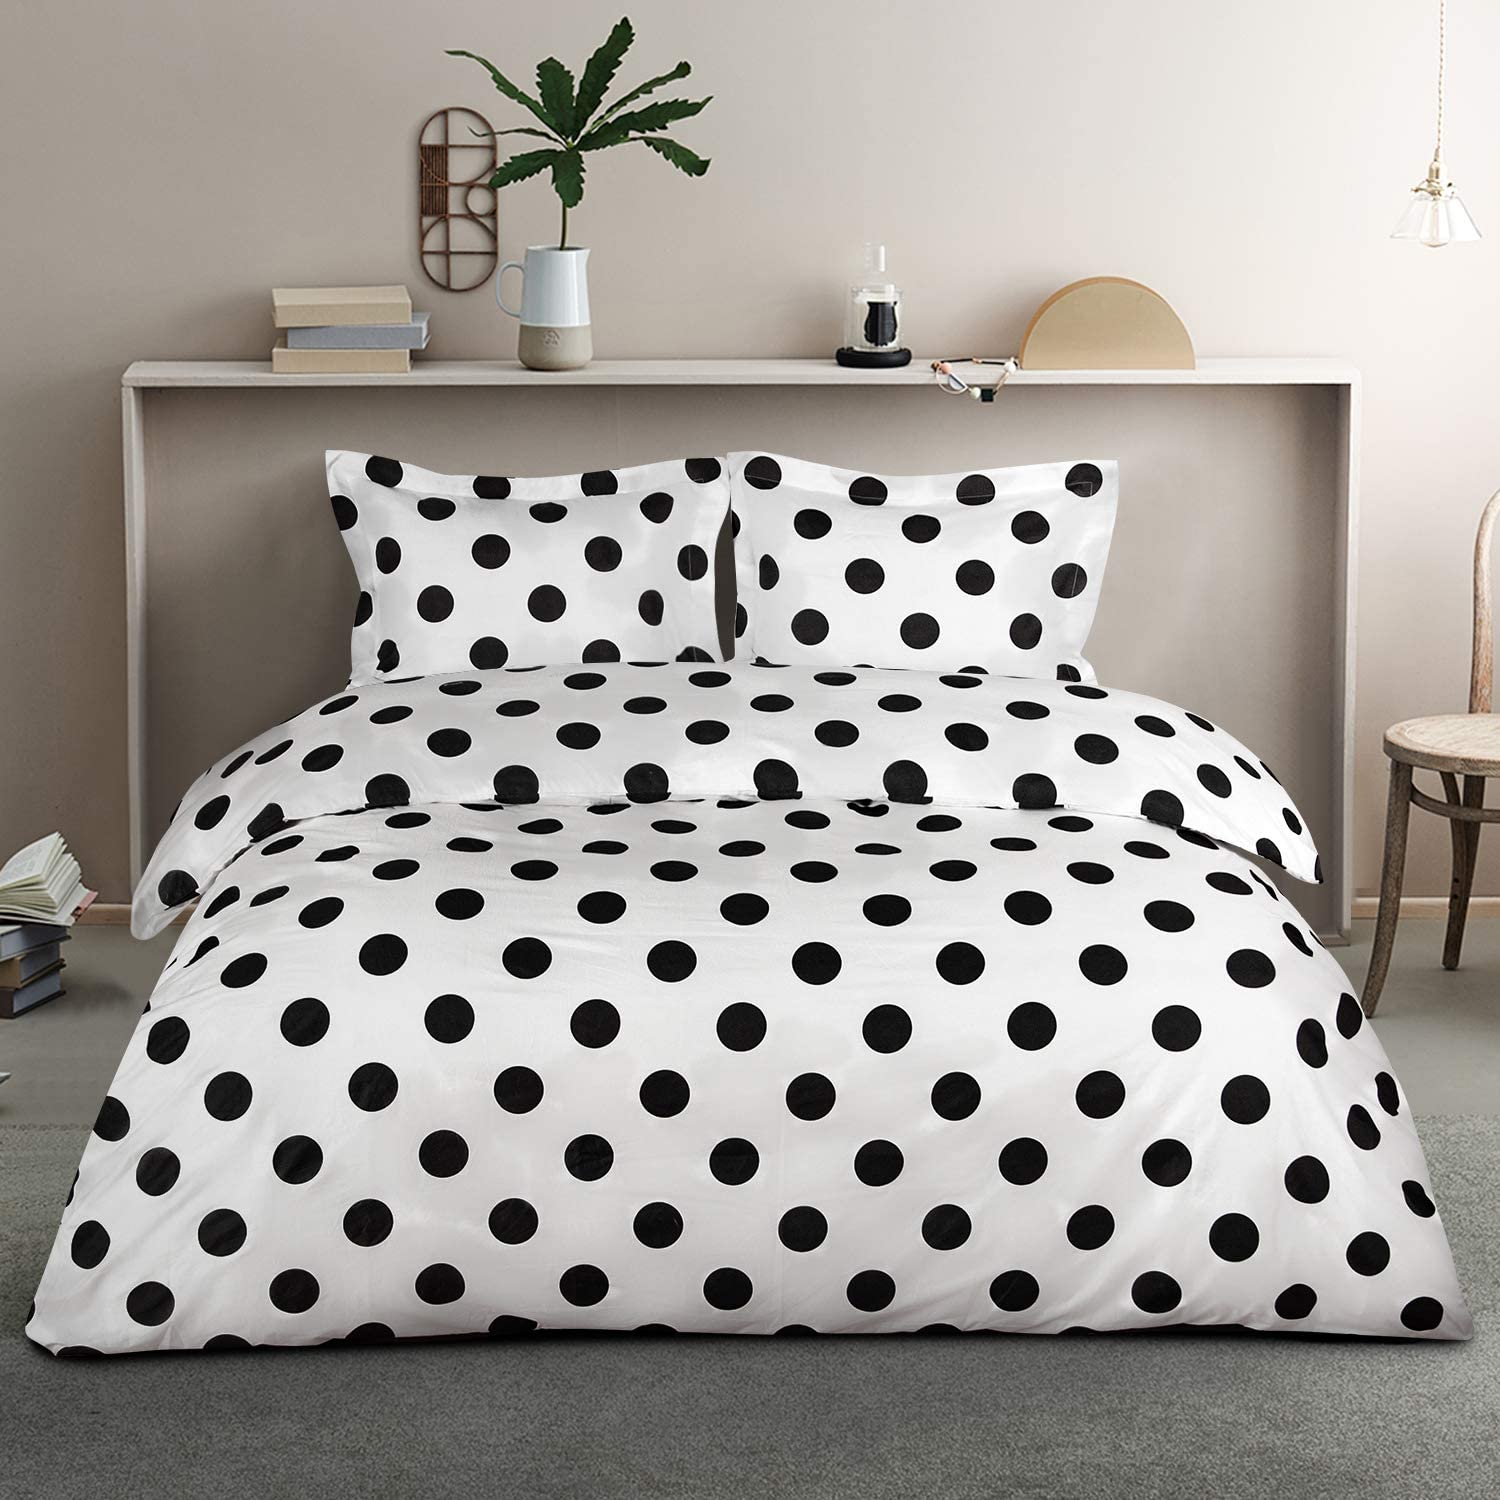 NTBAY Microfiber Queen Duvet Cover Set 3 Pieces Ultra Soft Cow Printed Comforter Cover Set with Zipper Closure and Corner Ties Black and White